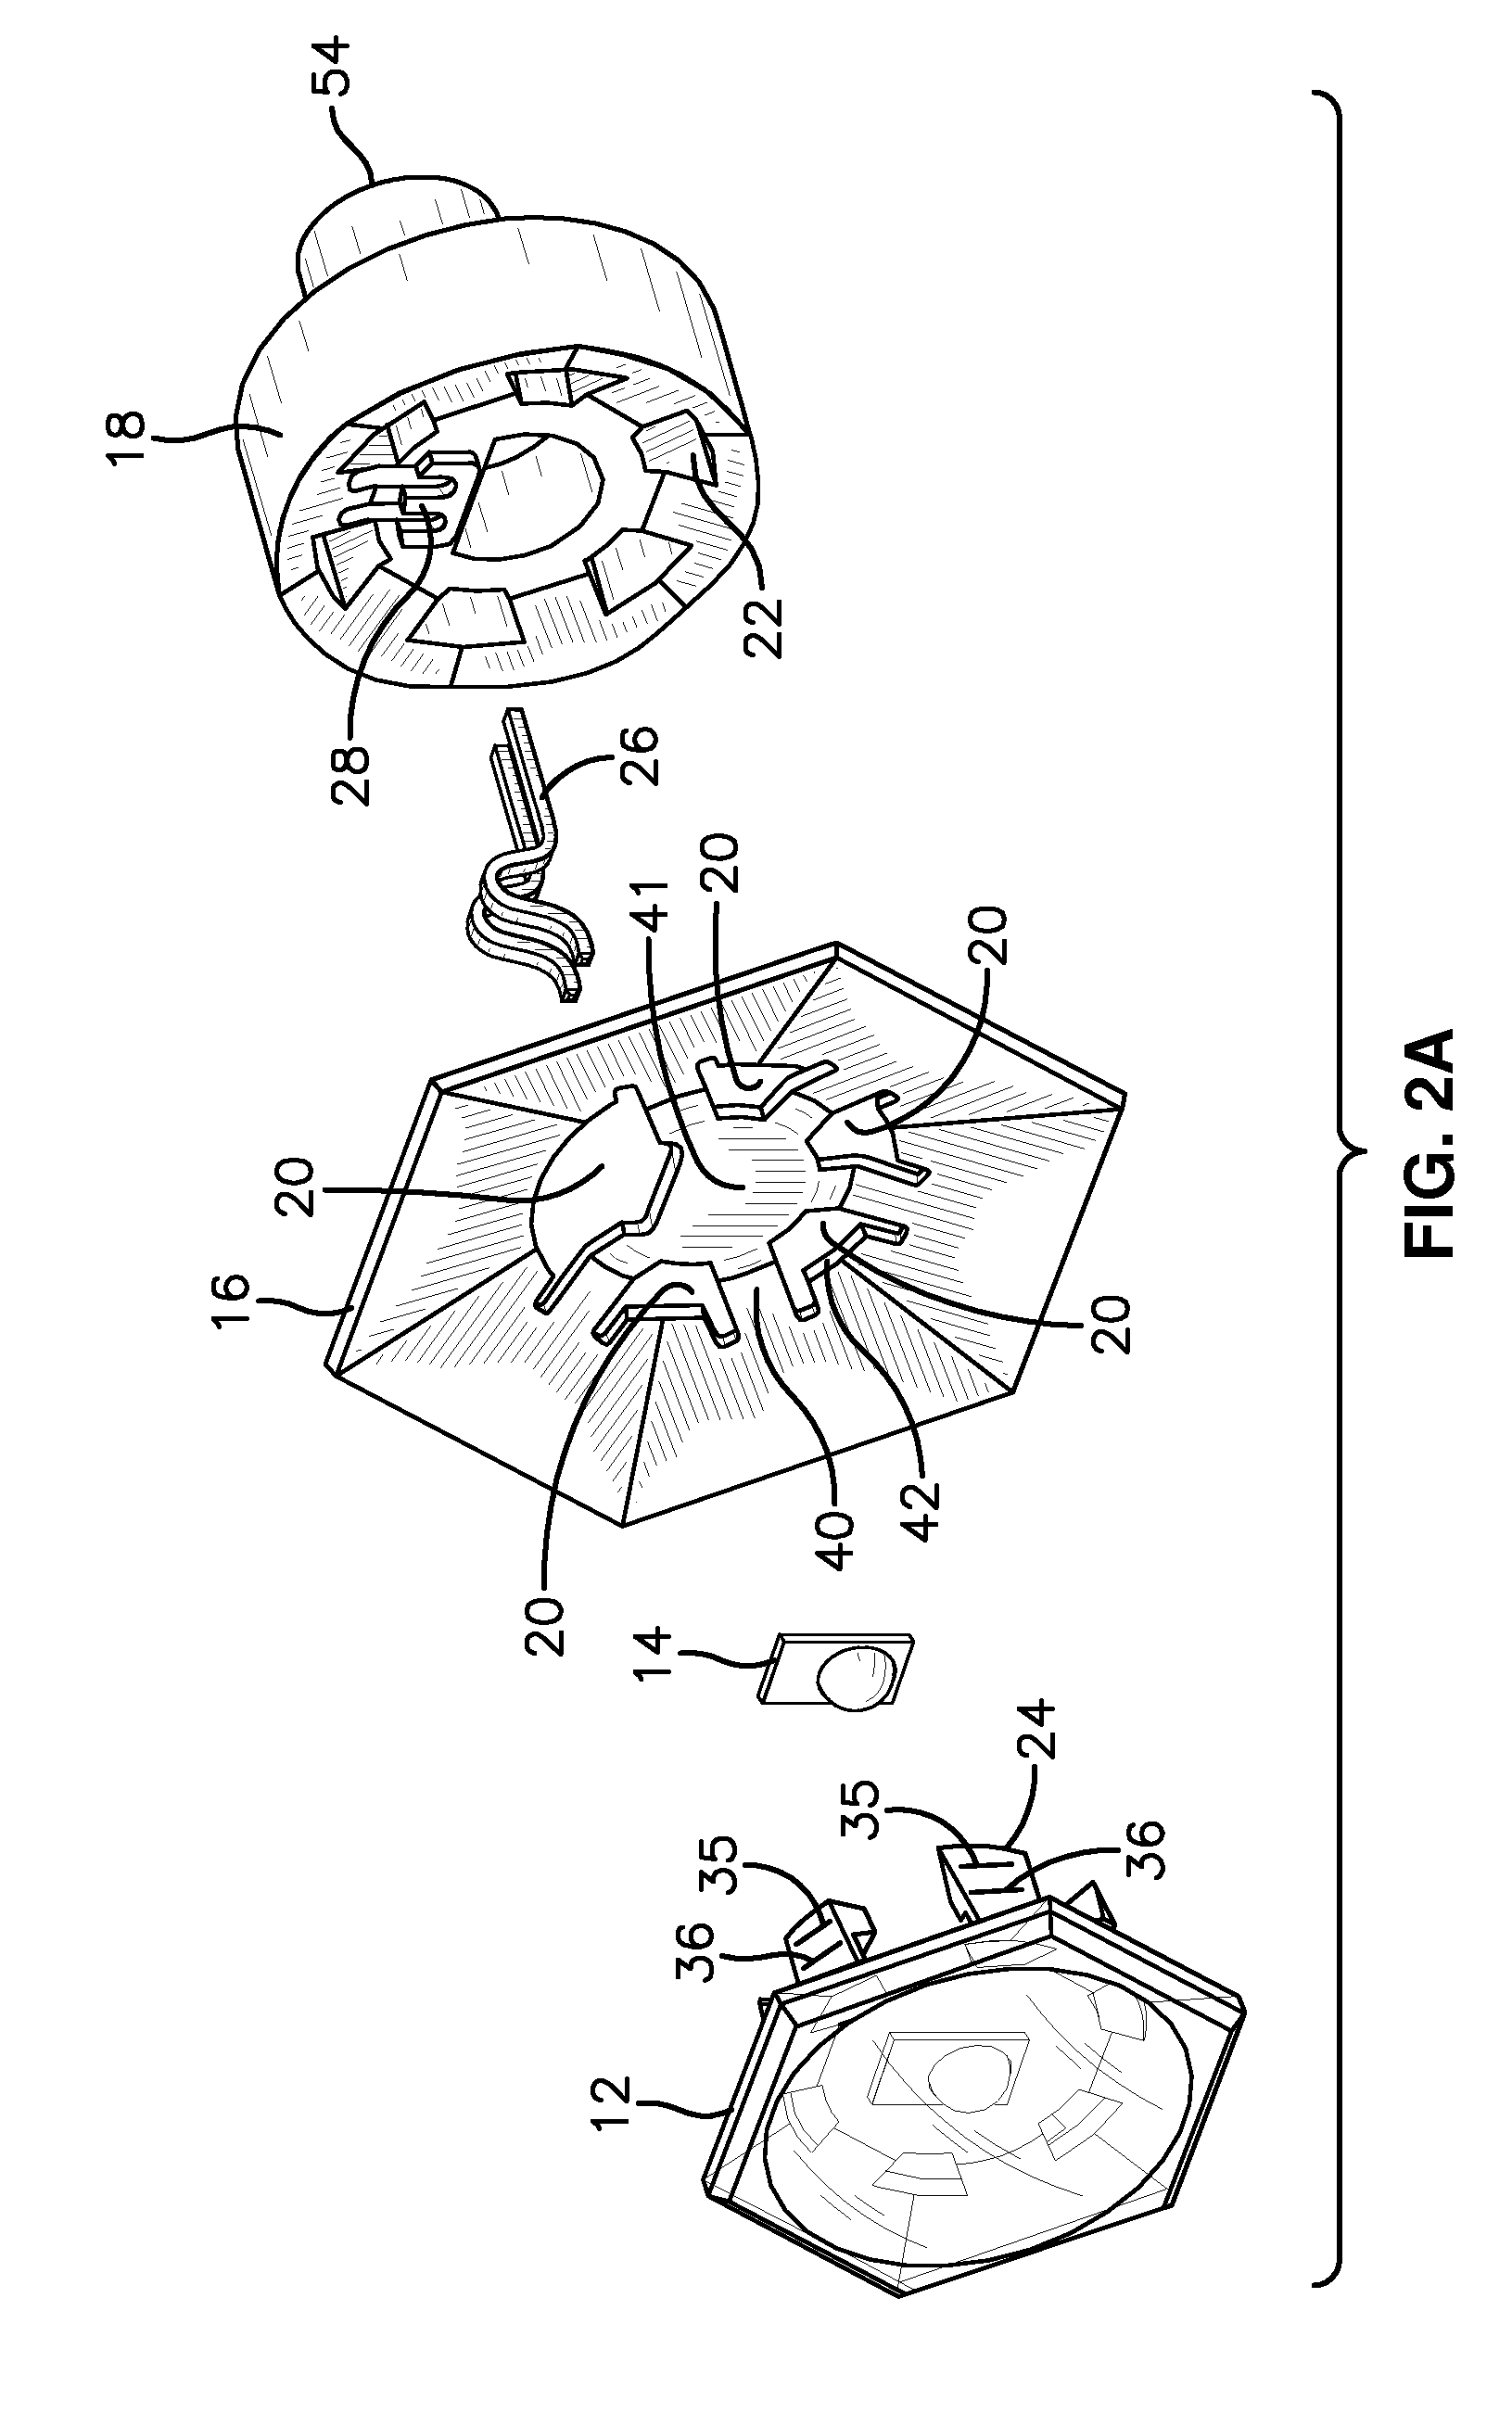 Connector assembly for termination of miniature electronics